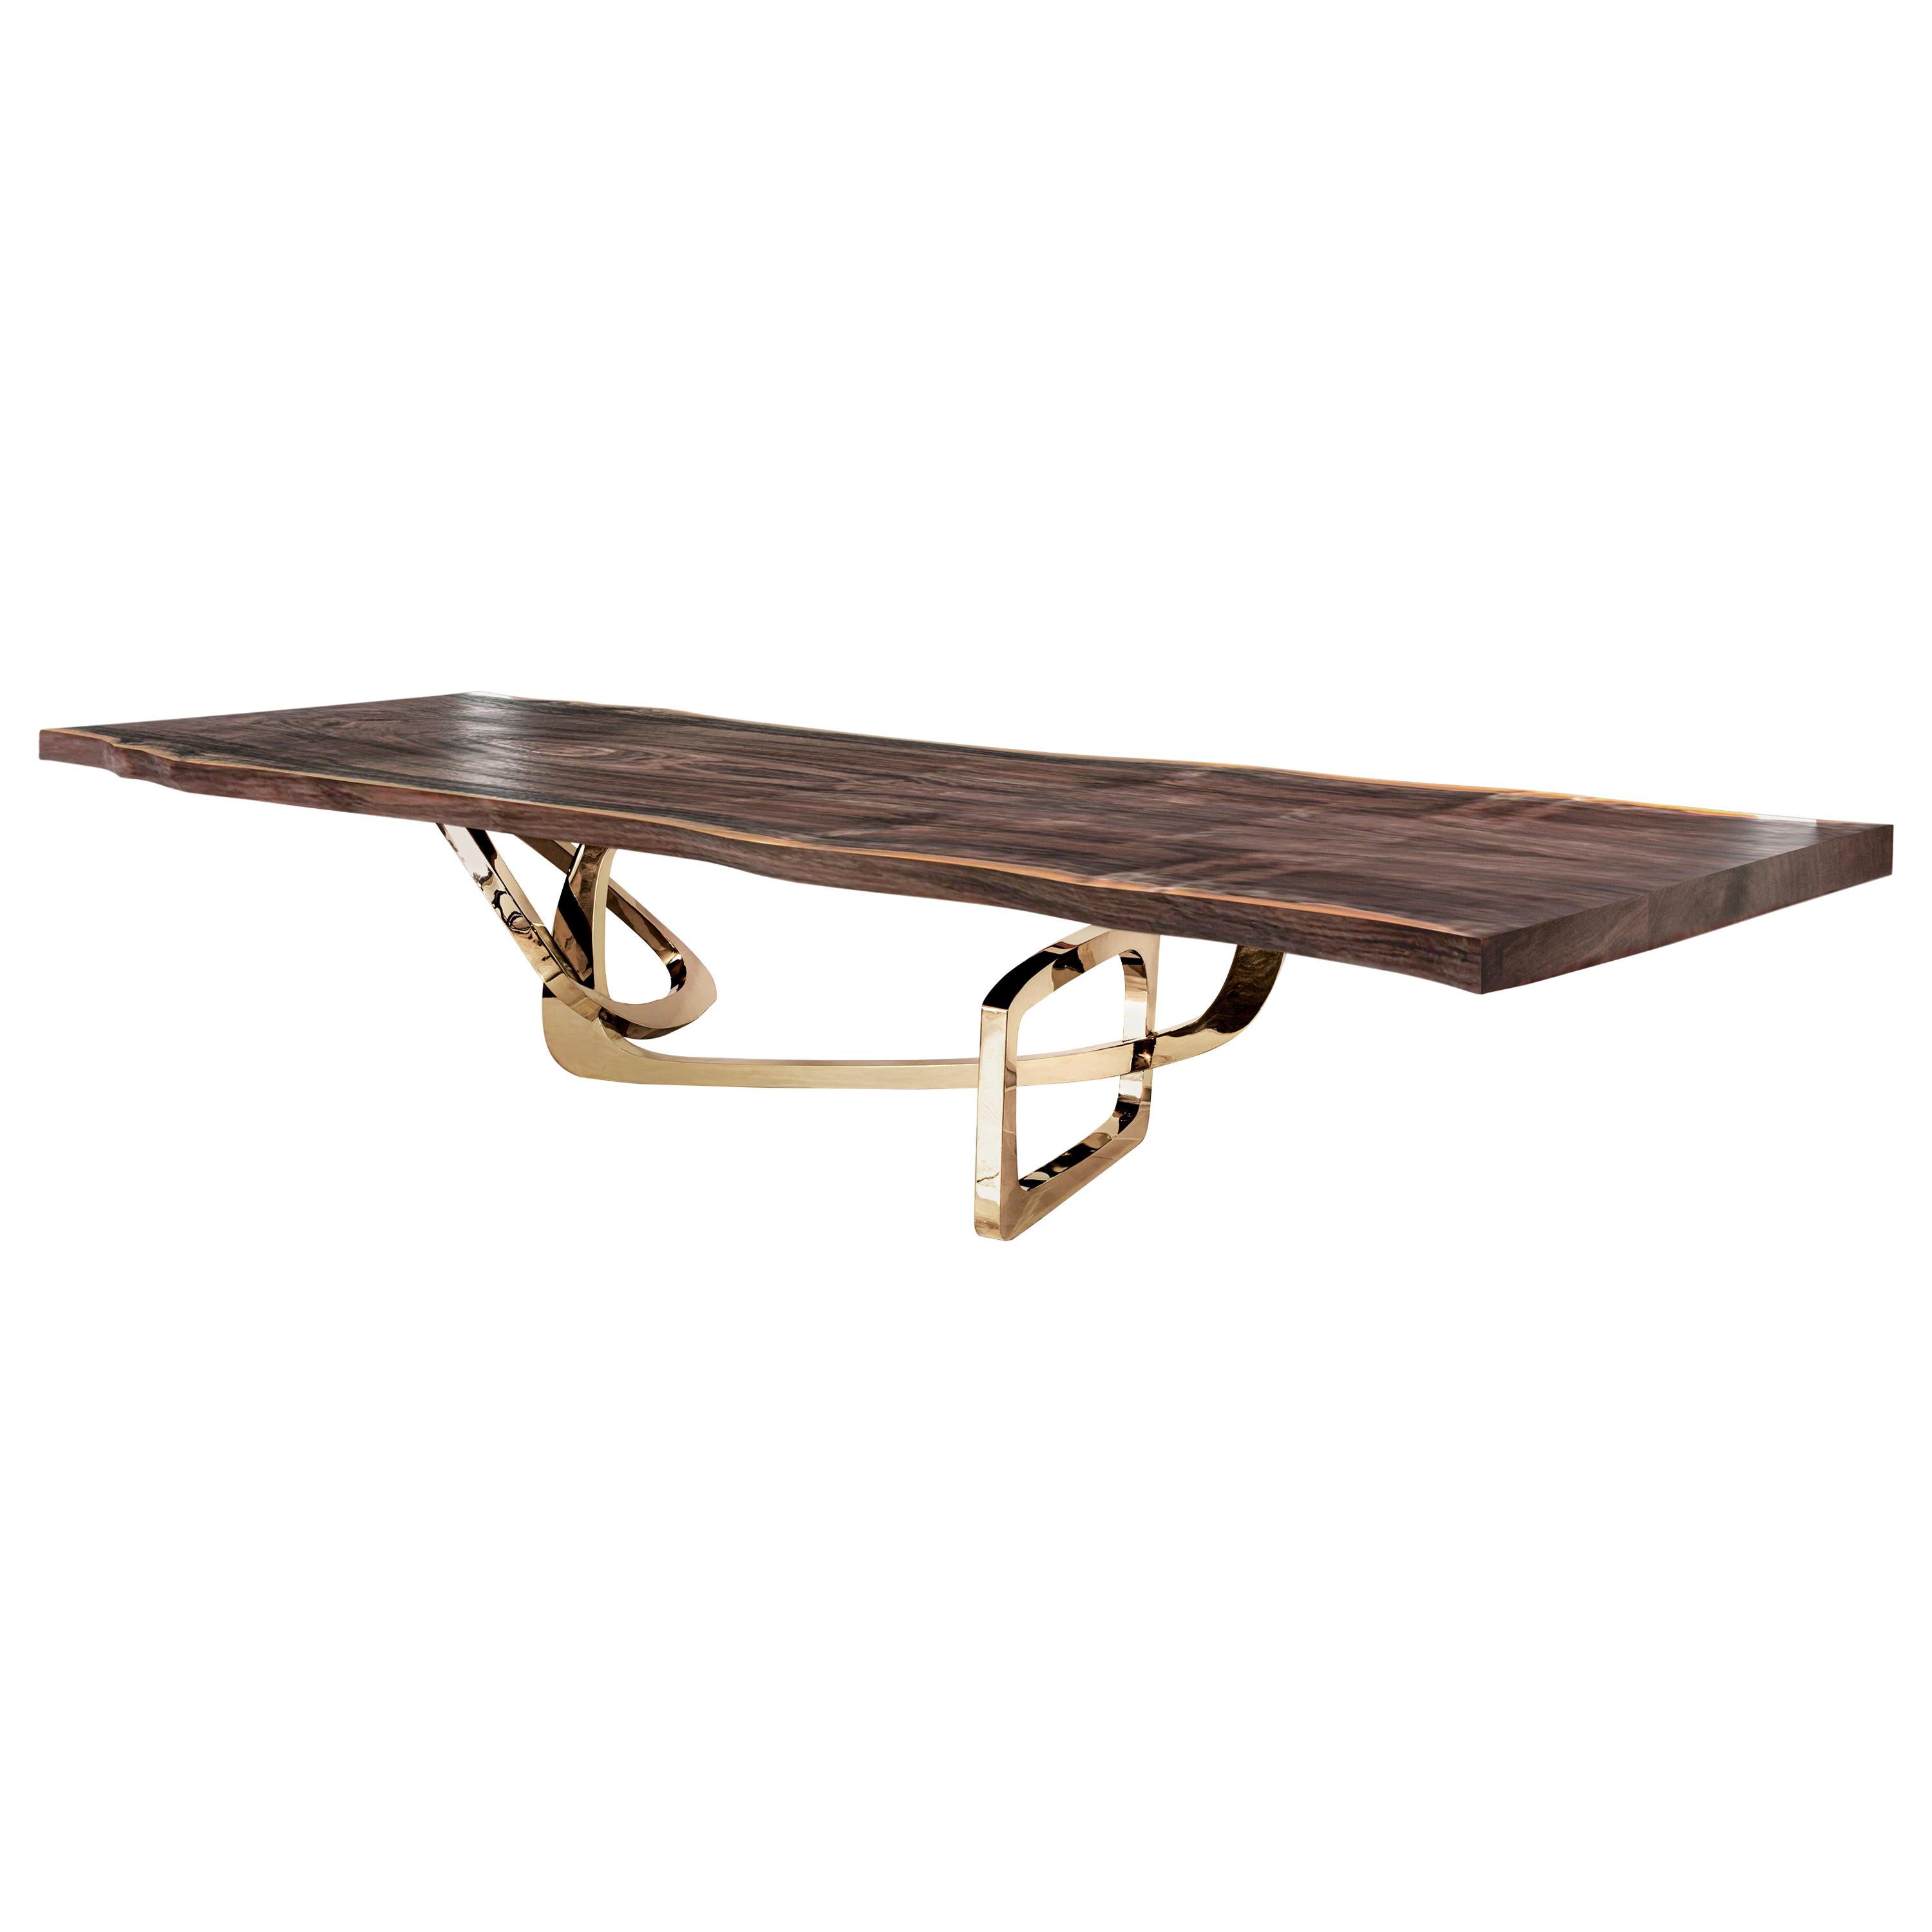 The Bangle dining table by Barlas Baylar is a contemporary interpretation of Art Deco design inspiration by utilizing rigorous craft.  The sculptural Stainless Steel base and Solid Walnut top  is available in a variety of finishes.  The top can be